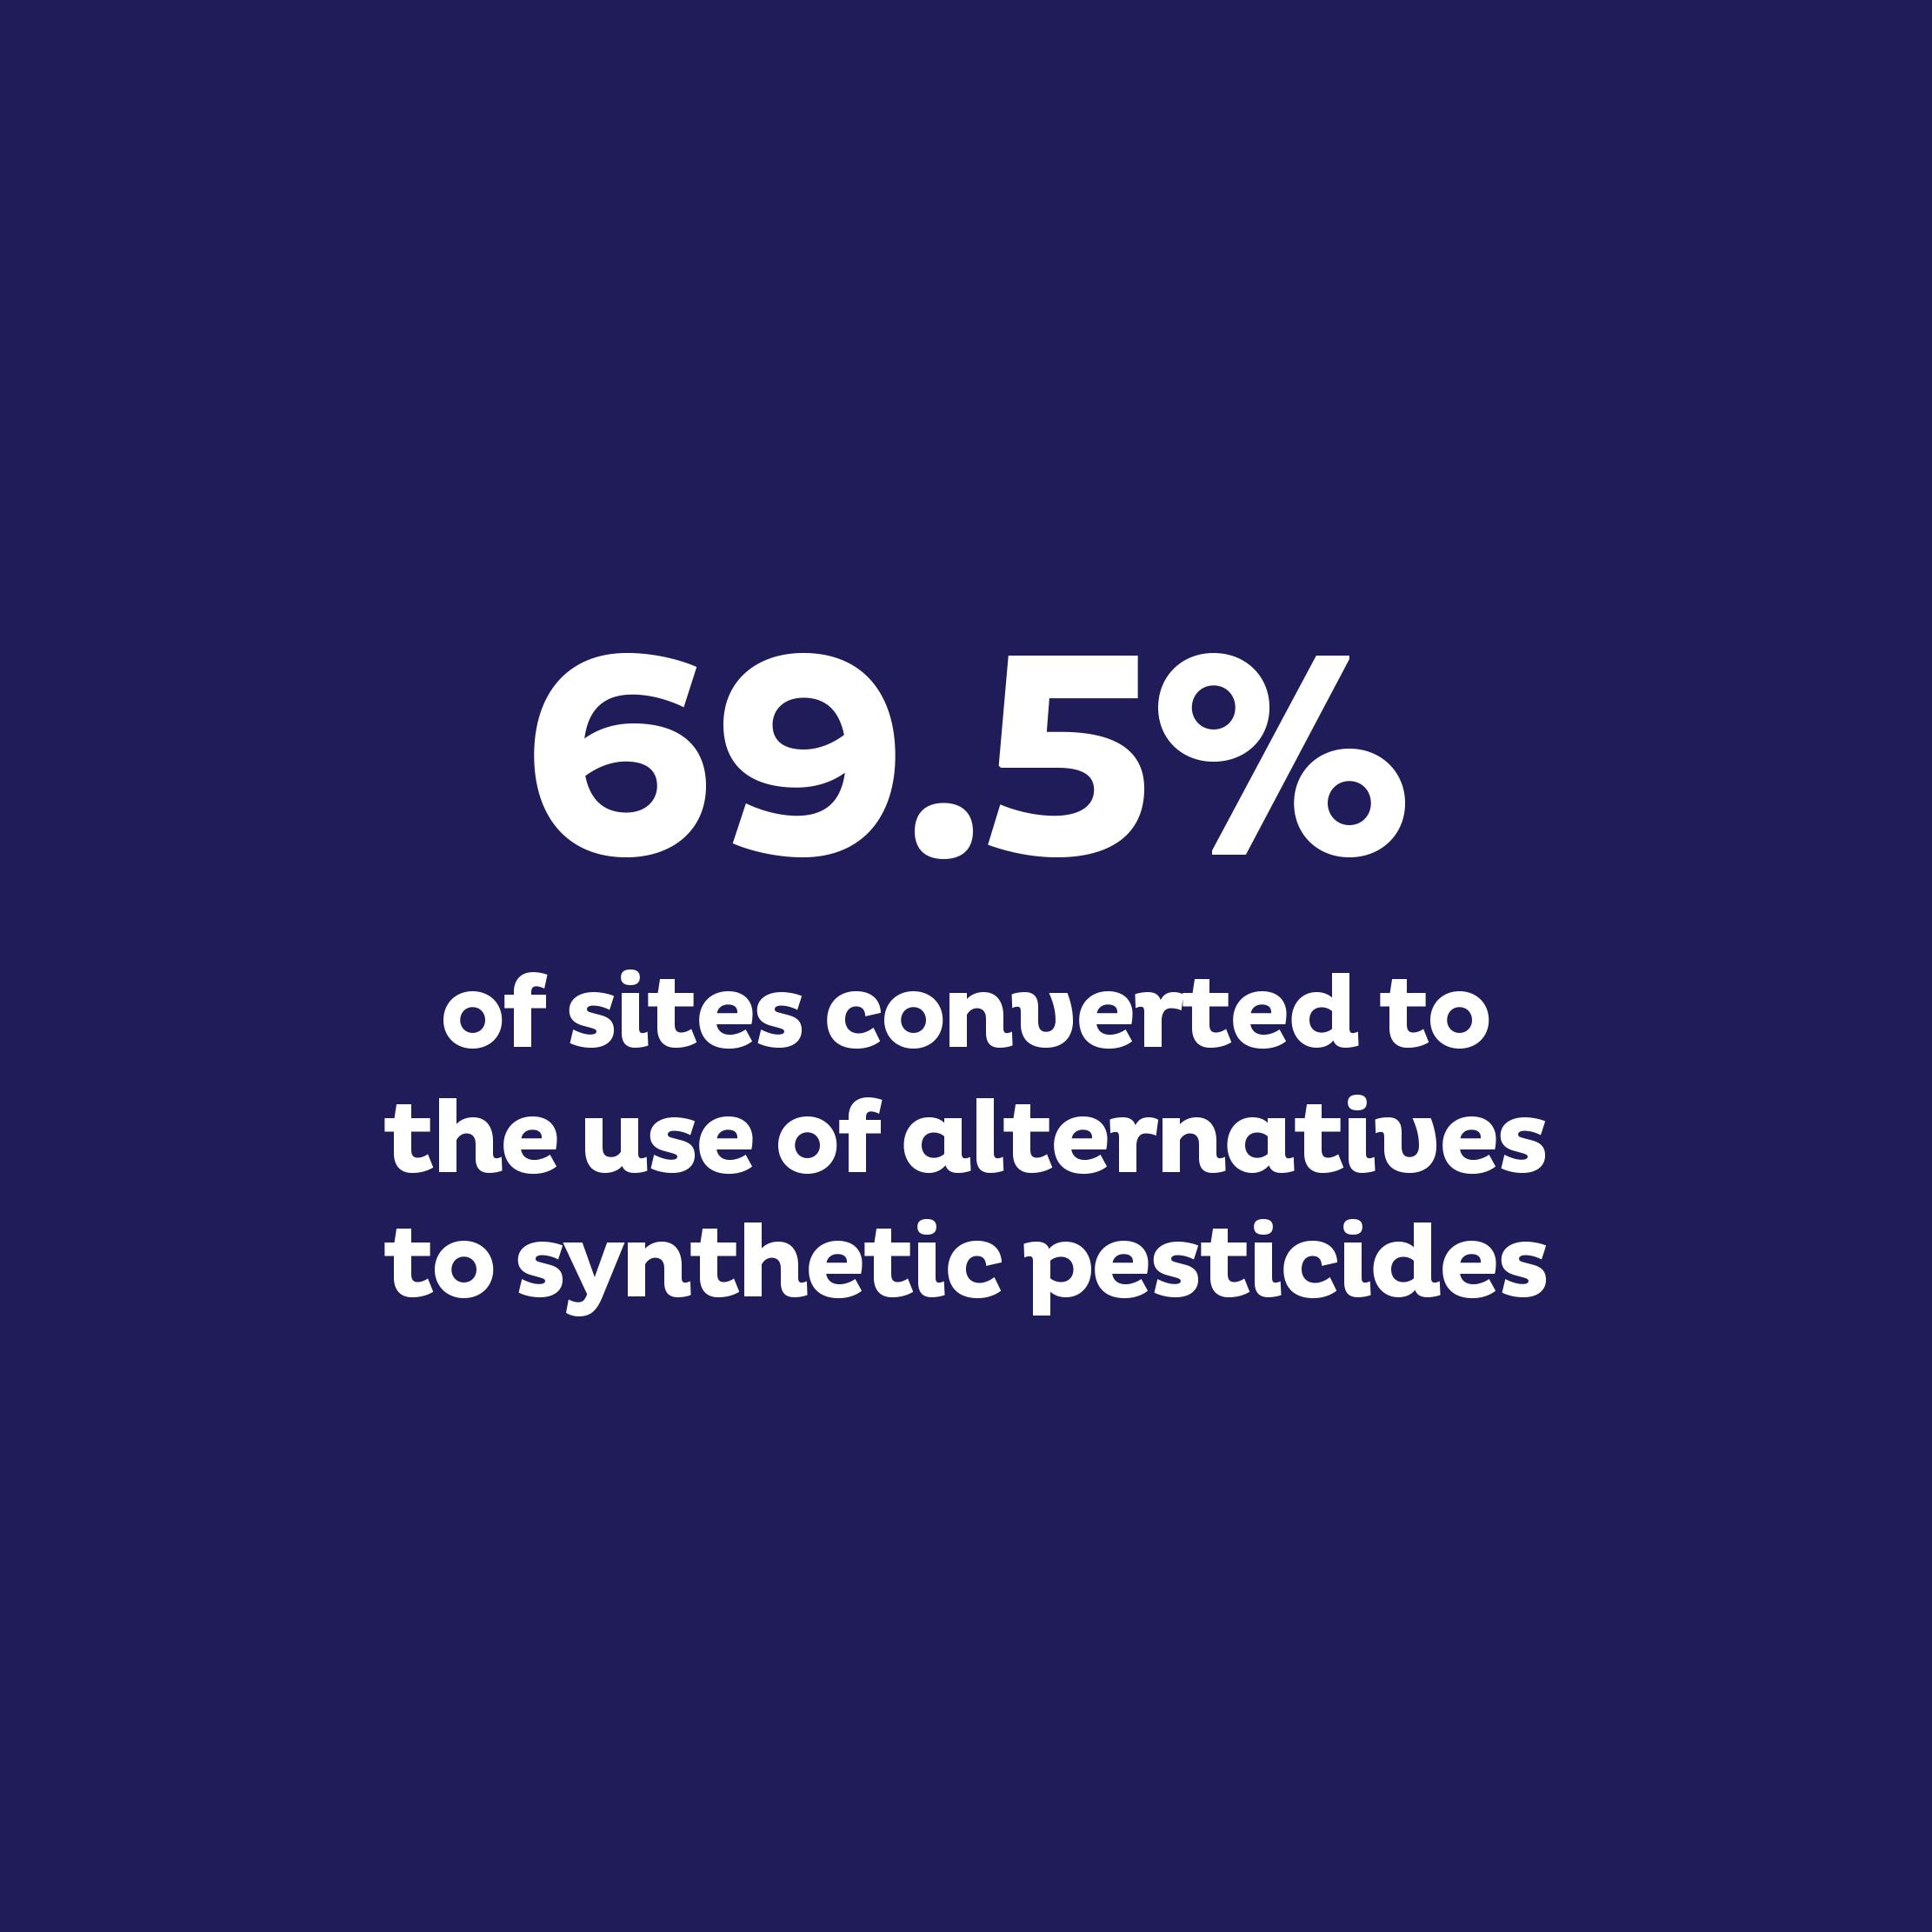 69.5% of sites converted to the use of alternatives to synthetic pesticides